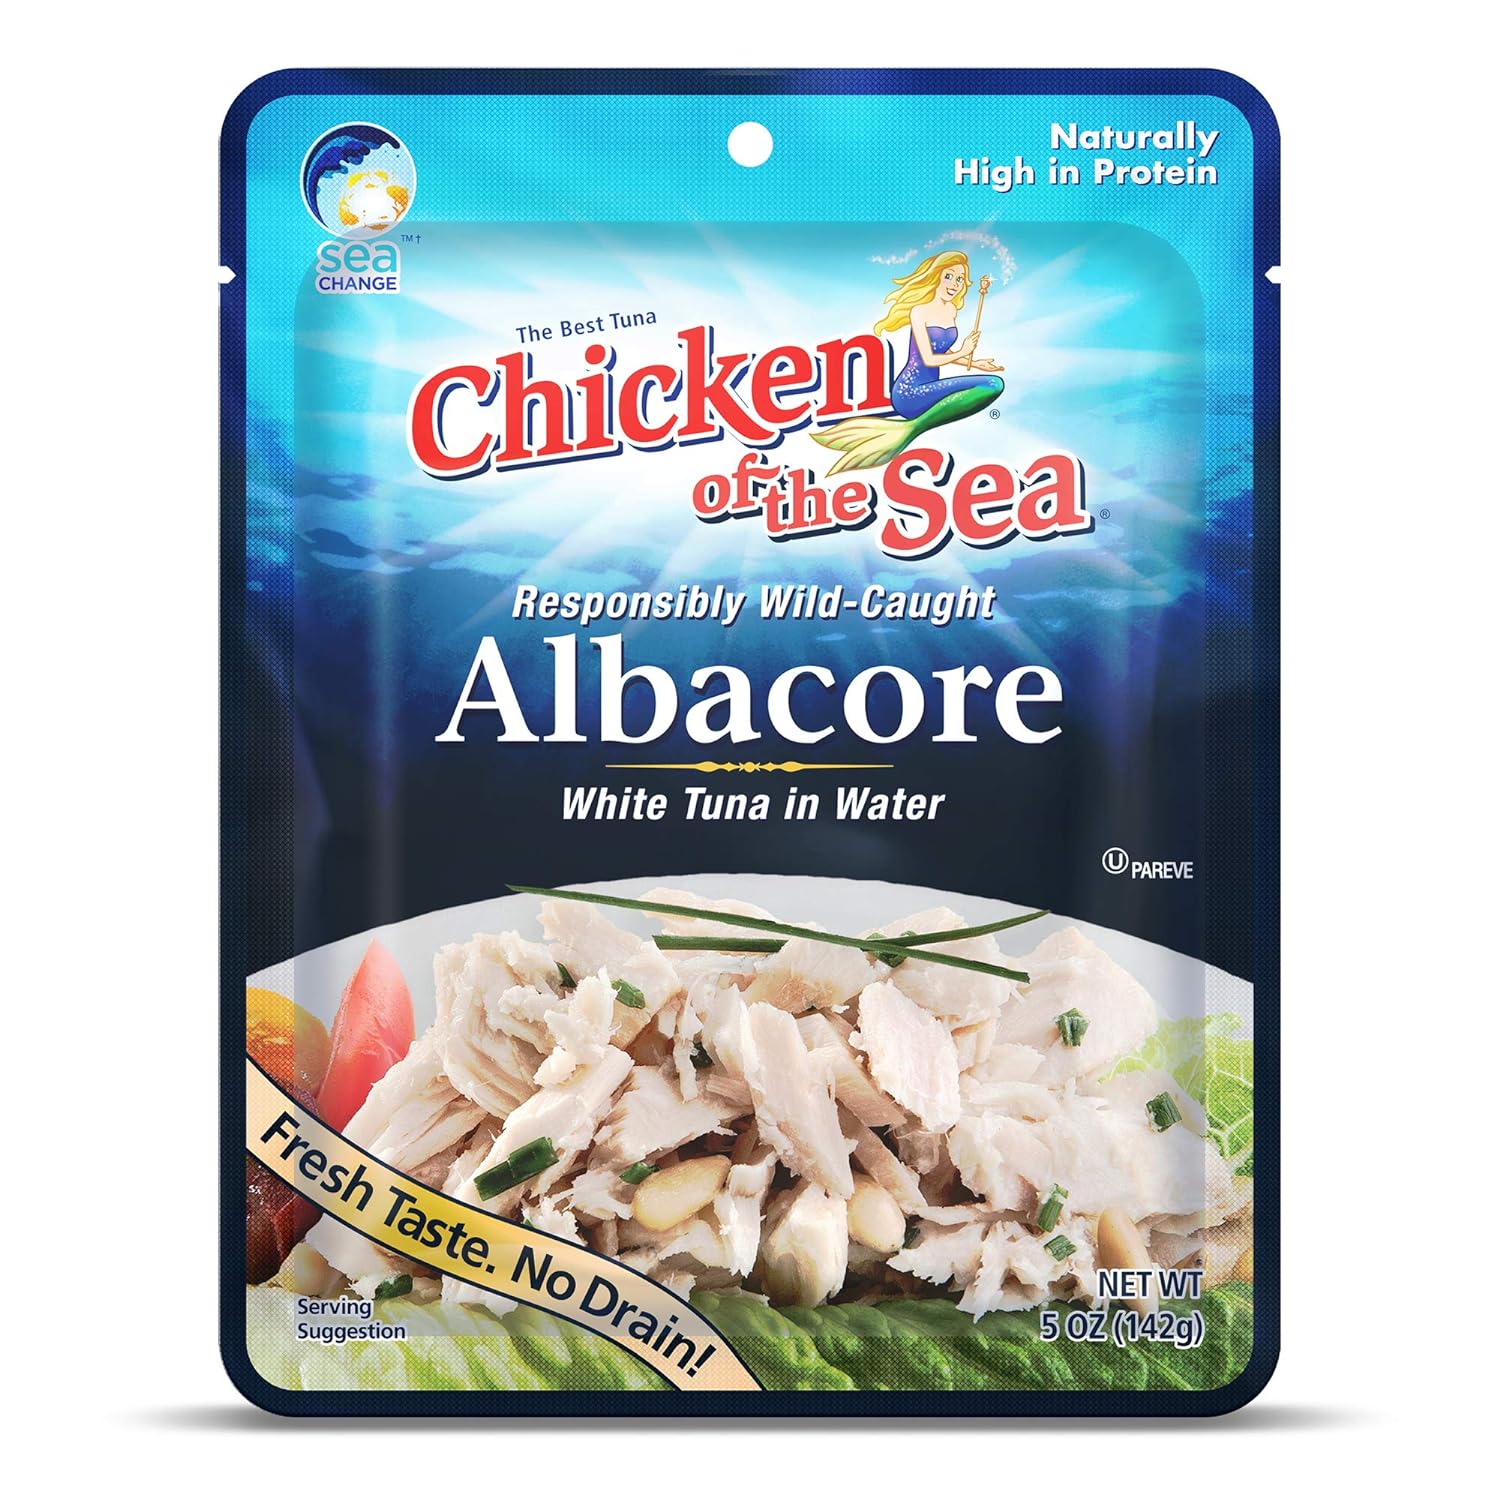 Chicken of the Sea Albacore Tuna in Water Packet, Wild Caught, 5-Ounce Packets (Pack of 1)